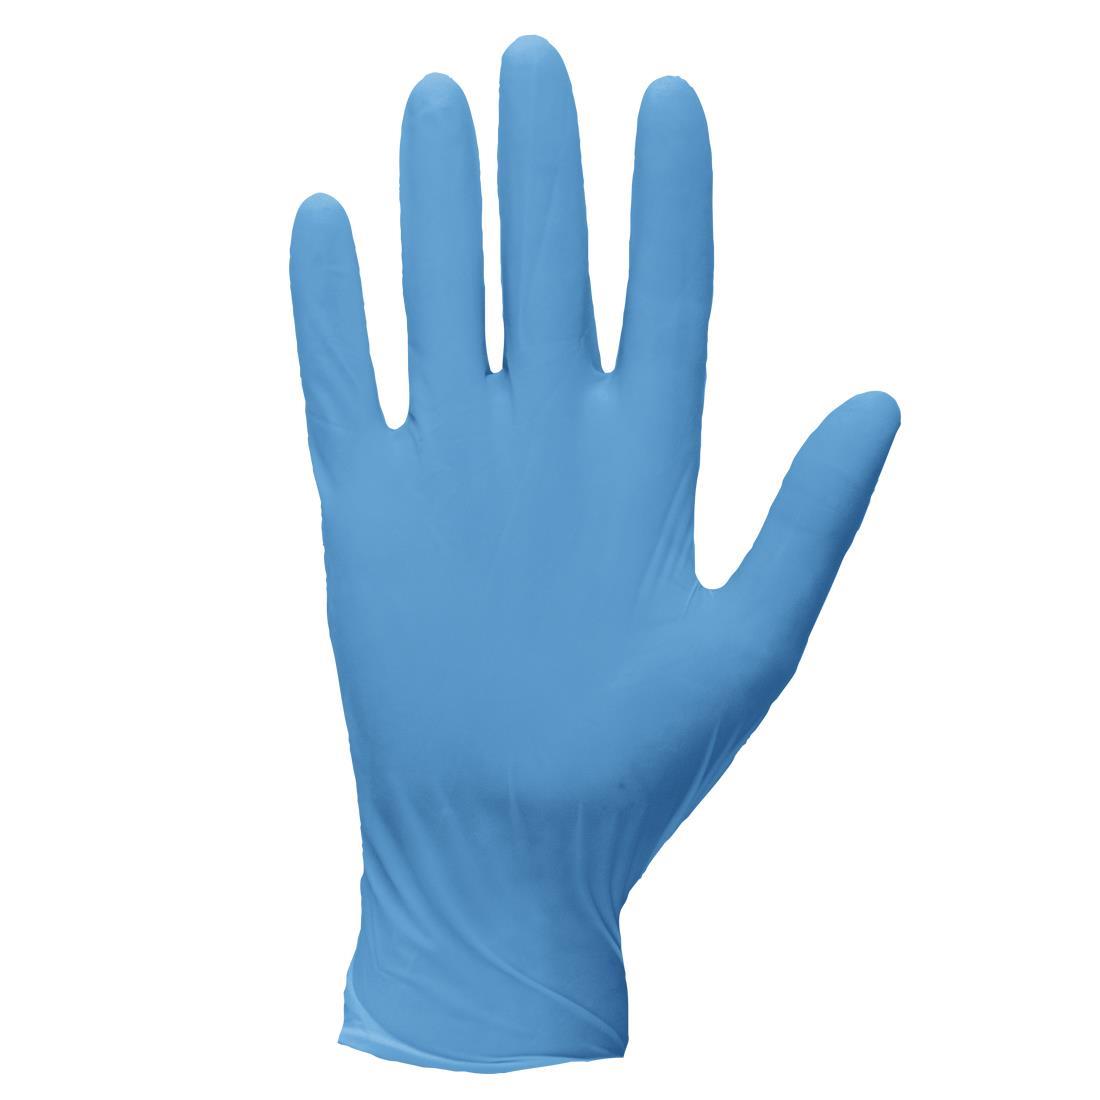 Portwest extra strength powder free disposable nitrile gloves (pack 100) #A924